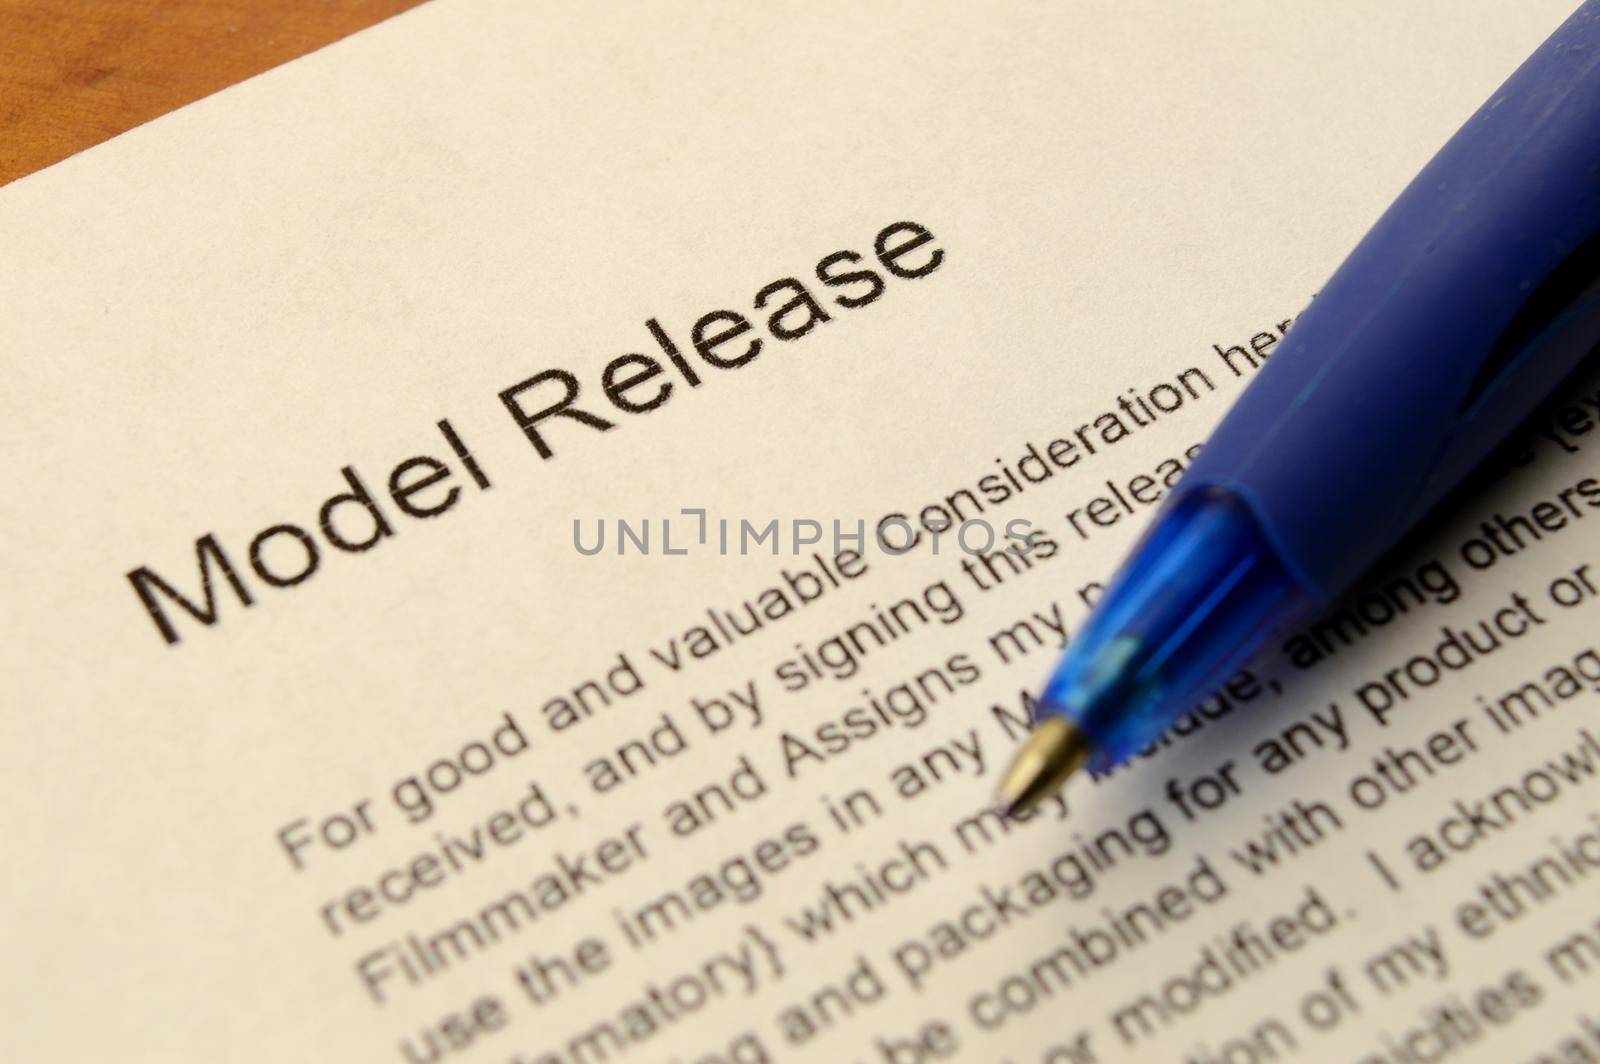 A macro shot of a Model Release form used for certain copyright productions.